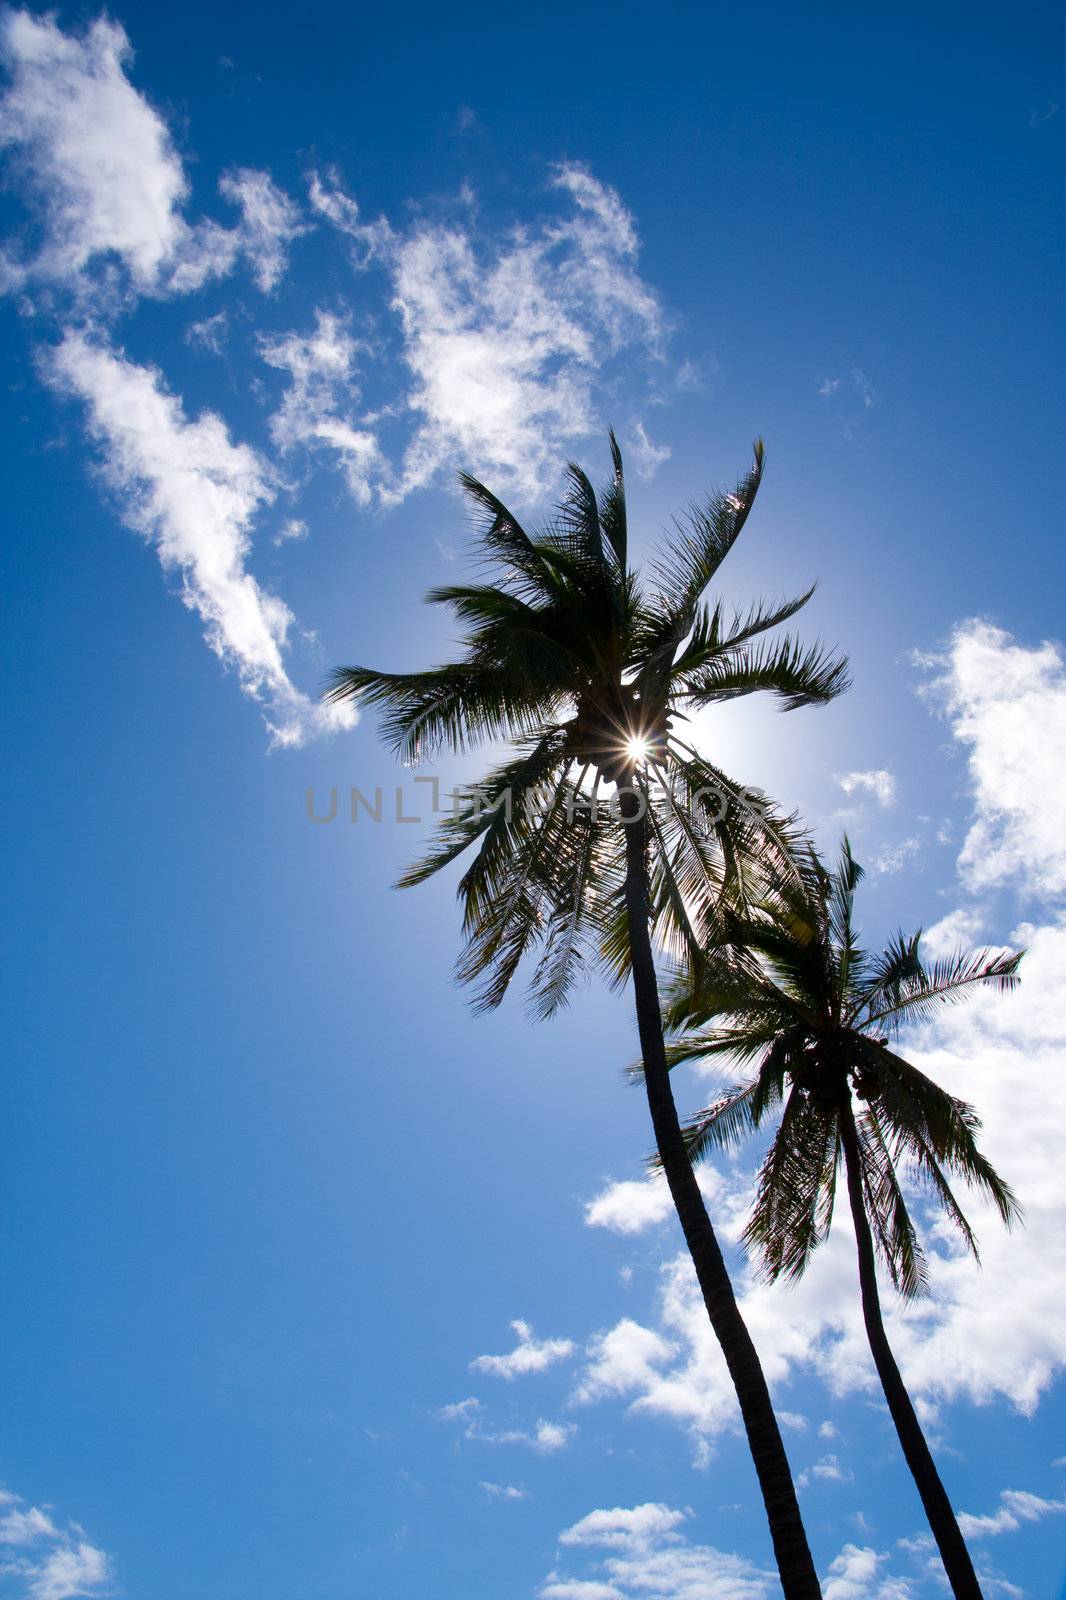 Palm trees silhouette on beautiful blue sky with white fluffy clouds